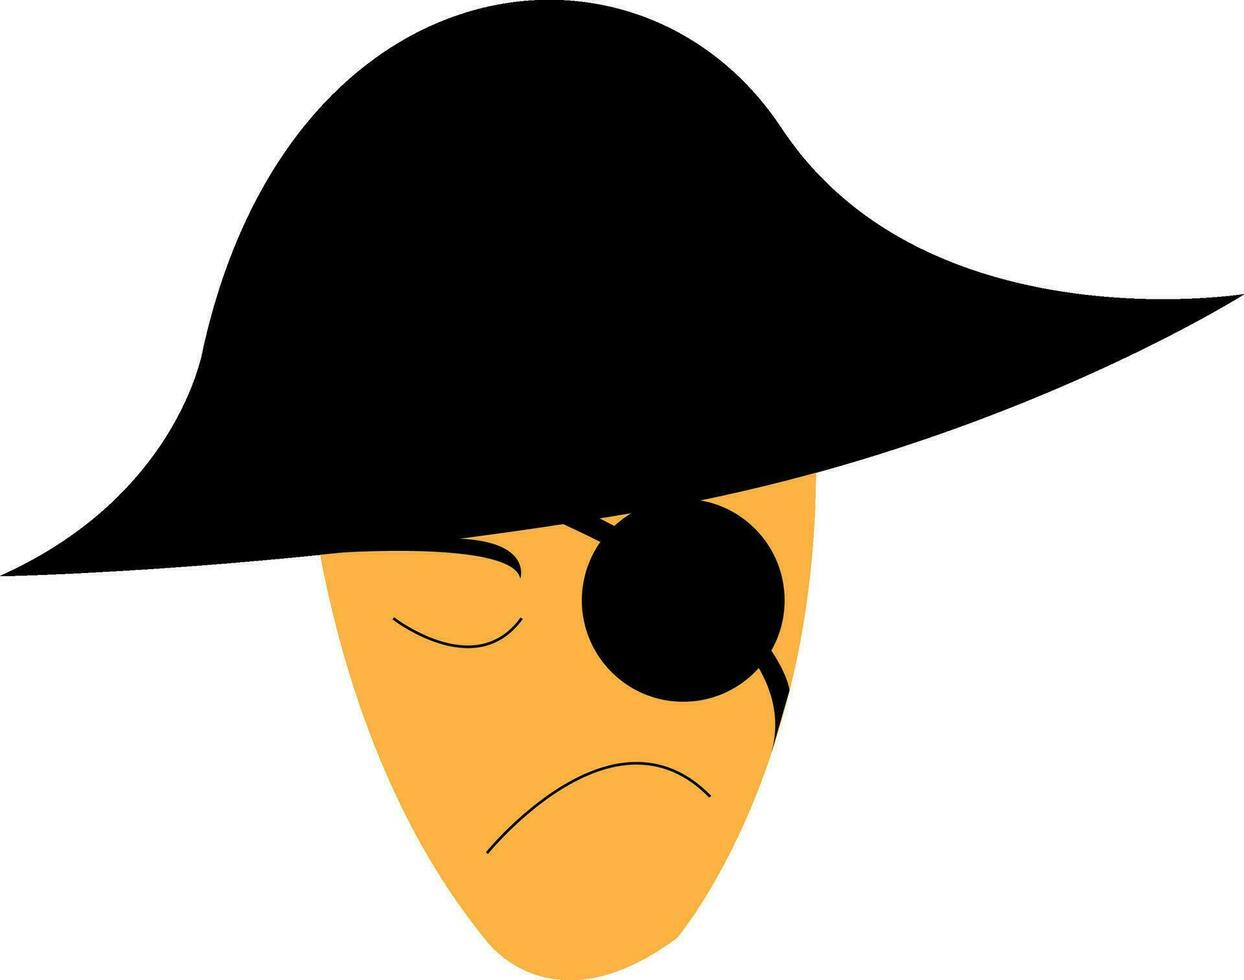 Clipart of a pirate vector or color illustration